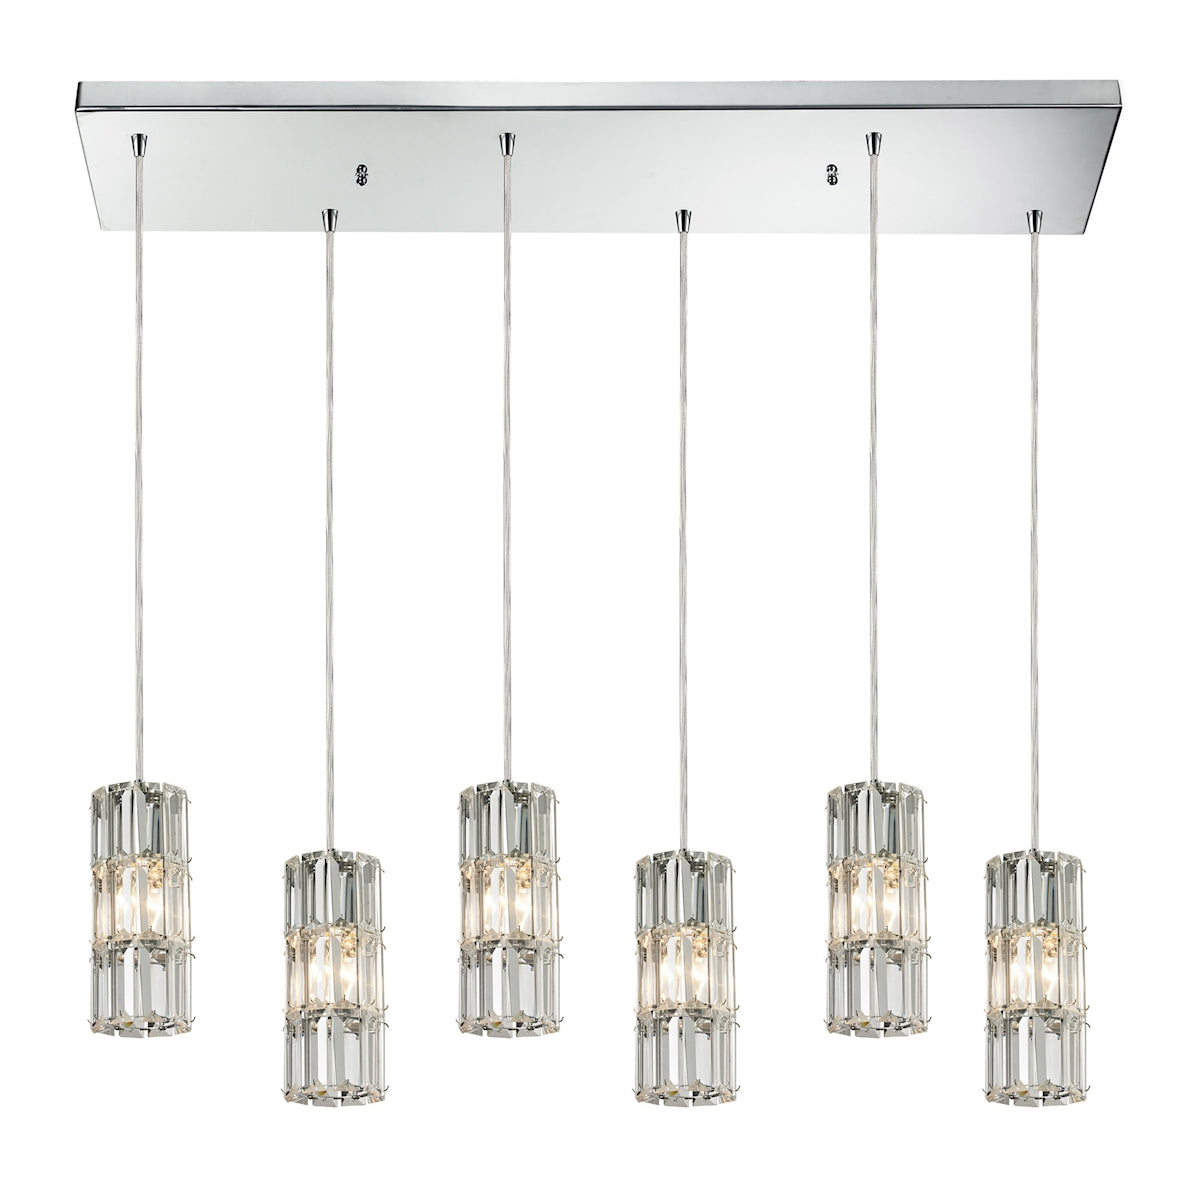 ELK Lighting 31486/6RC Cynthia 6-Light Rectangular Pendant Fixture in Polished Chrome with Crystal